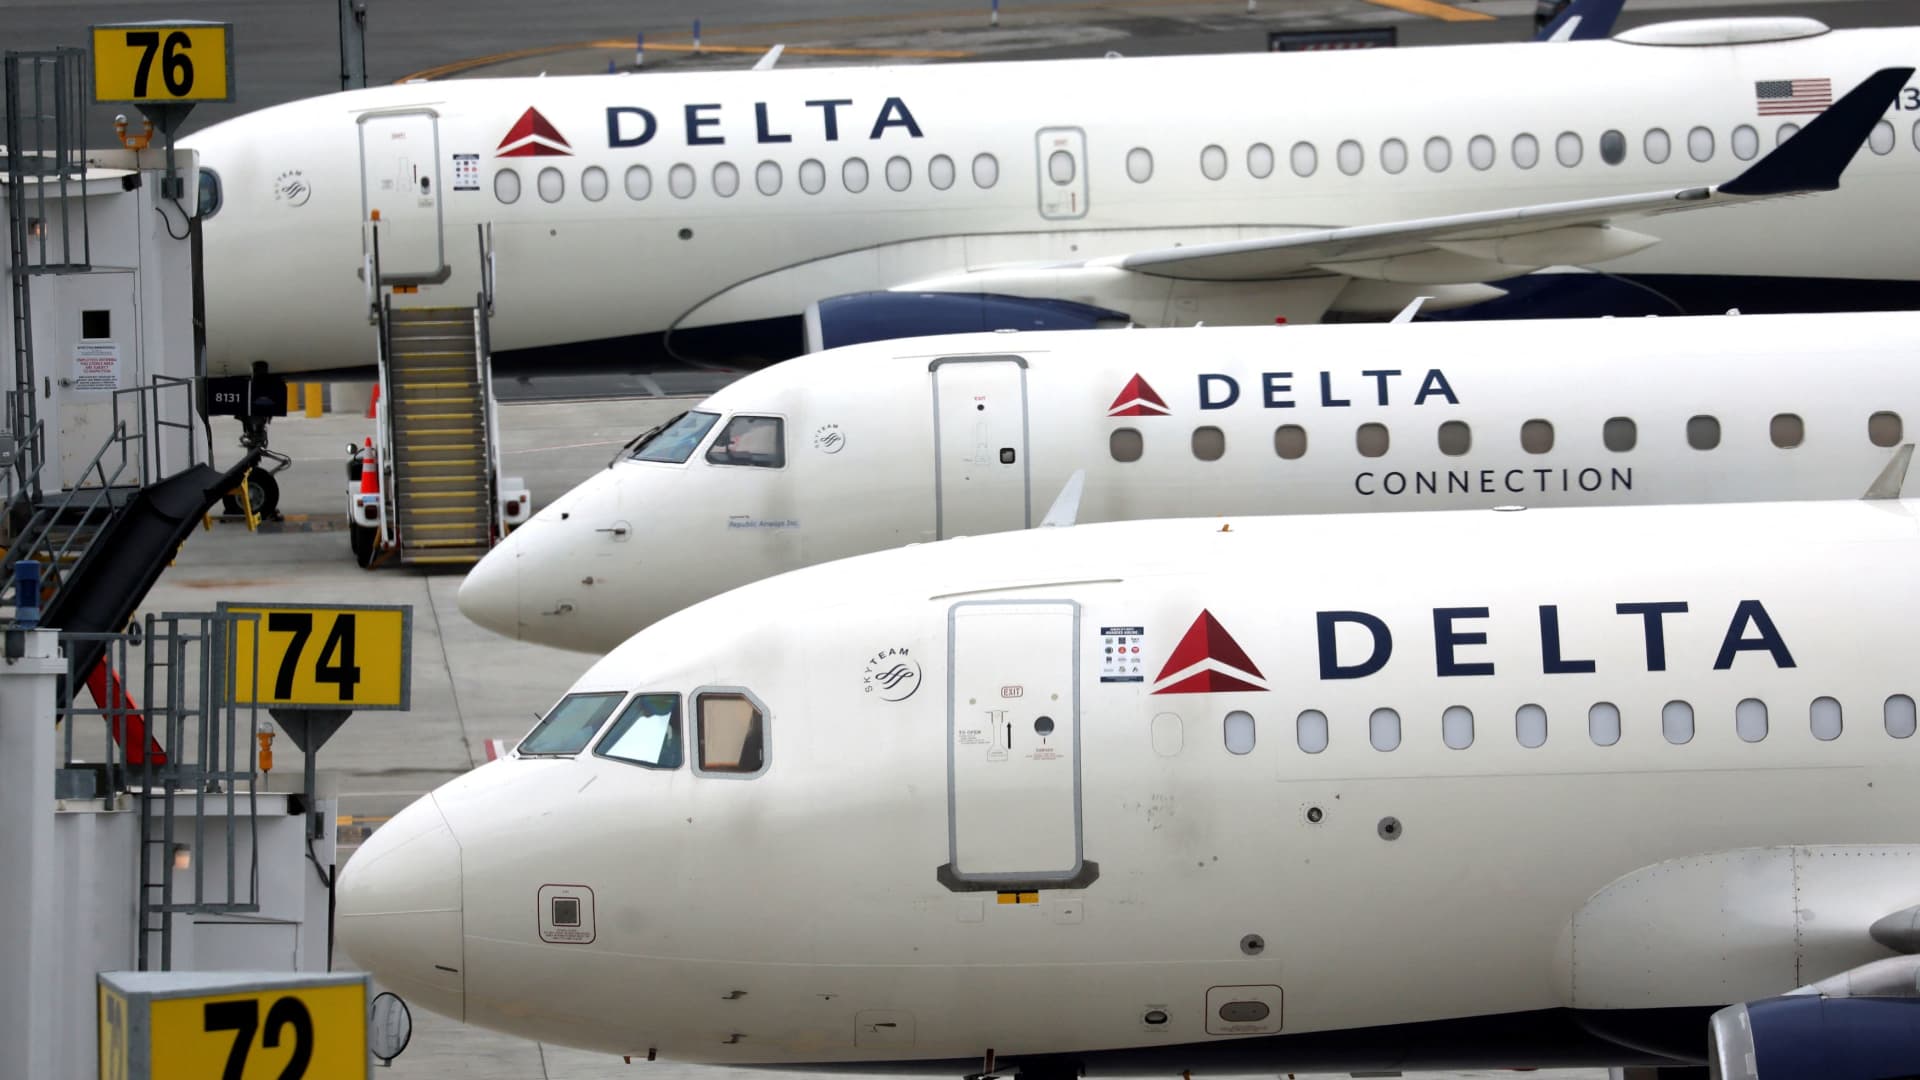 Delta Airlines passenger jets are pictured outside the newly completed 1.3 million-square foot $4 billion Delta Airlines Terminal C at LaGuardia Airport in New York, June 1, 2022.